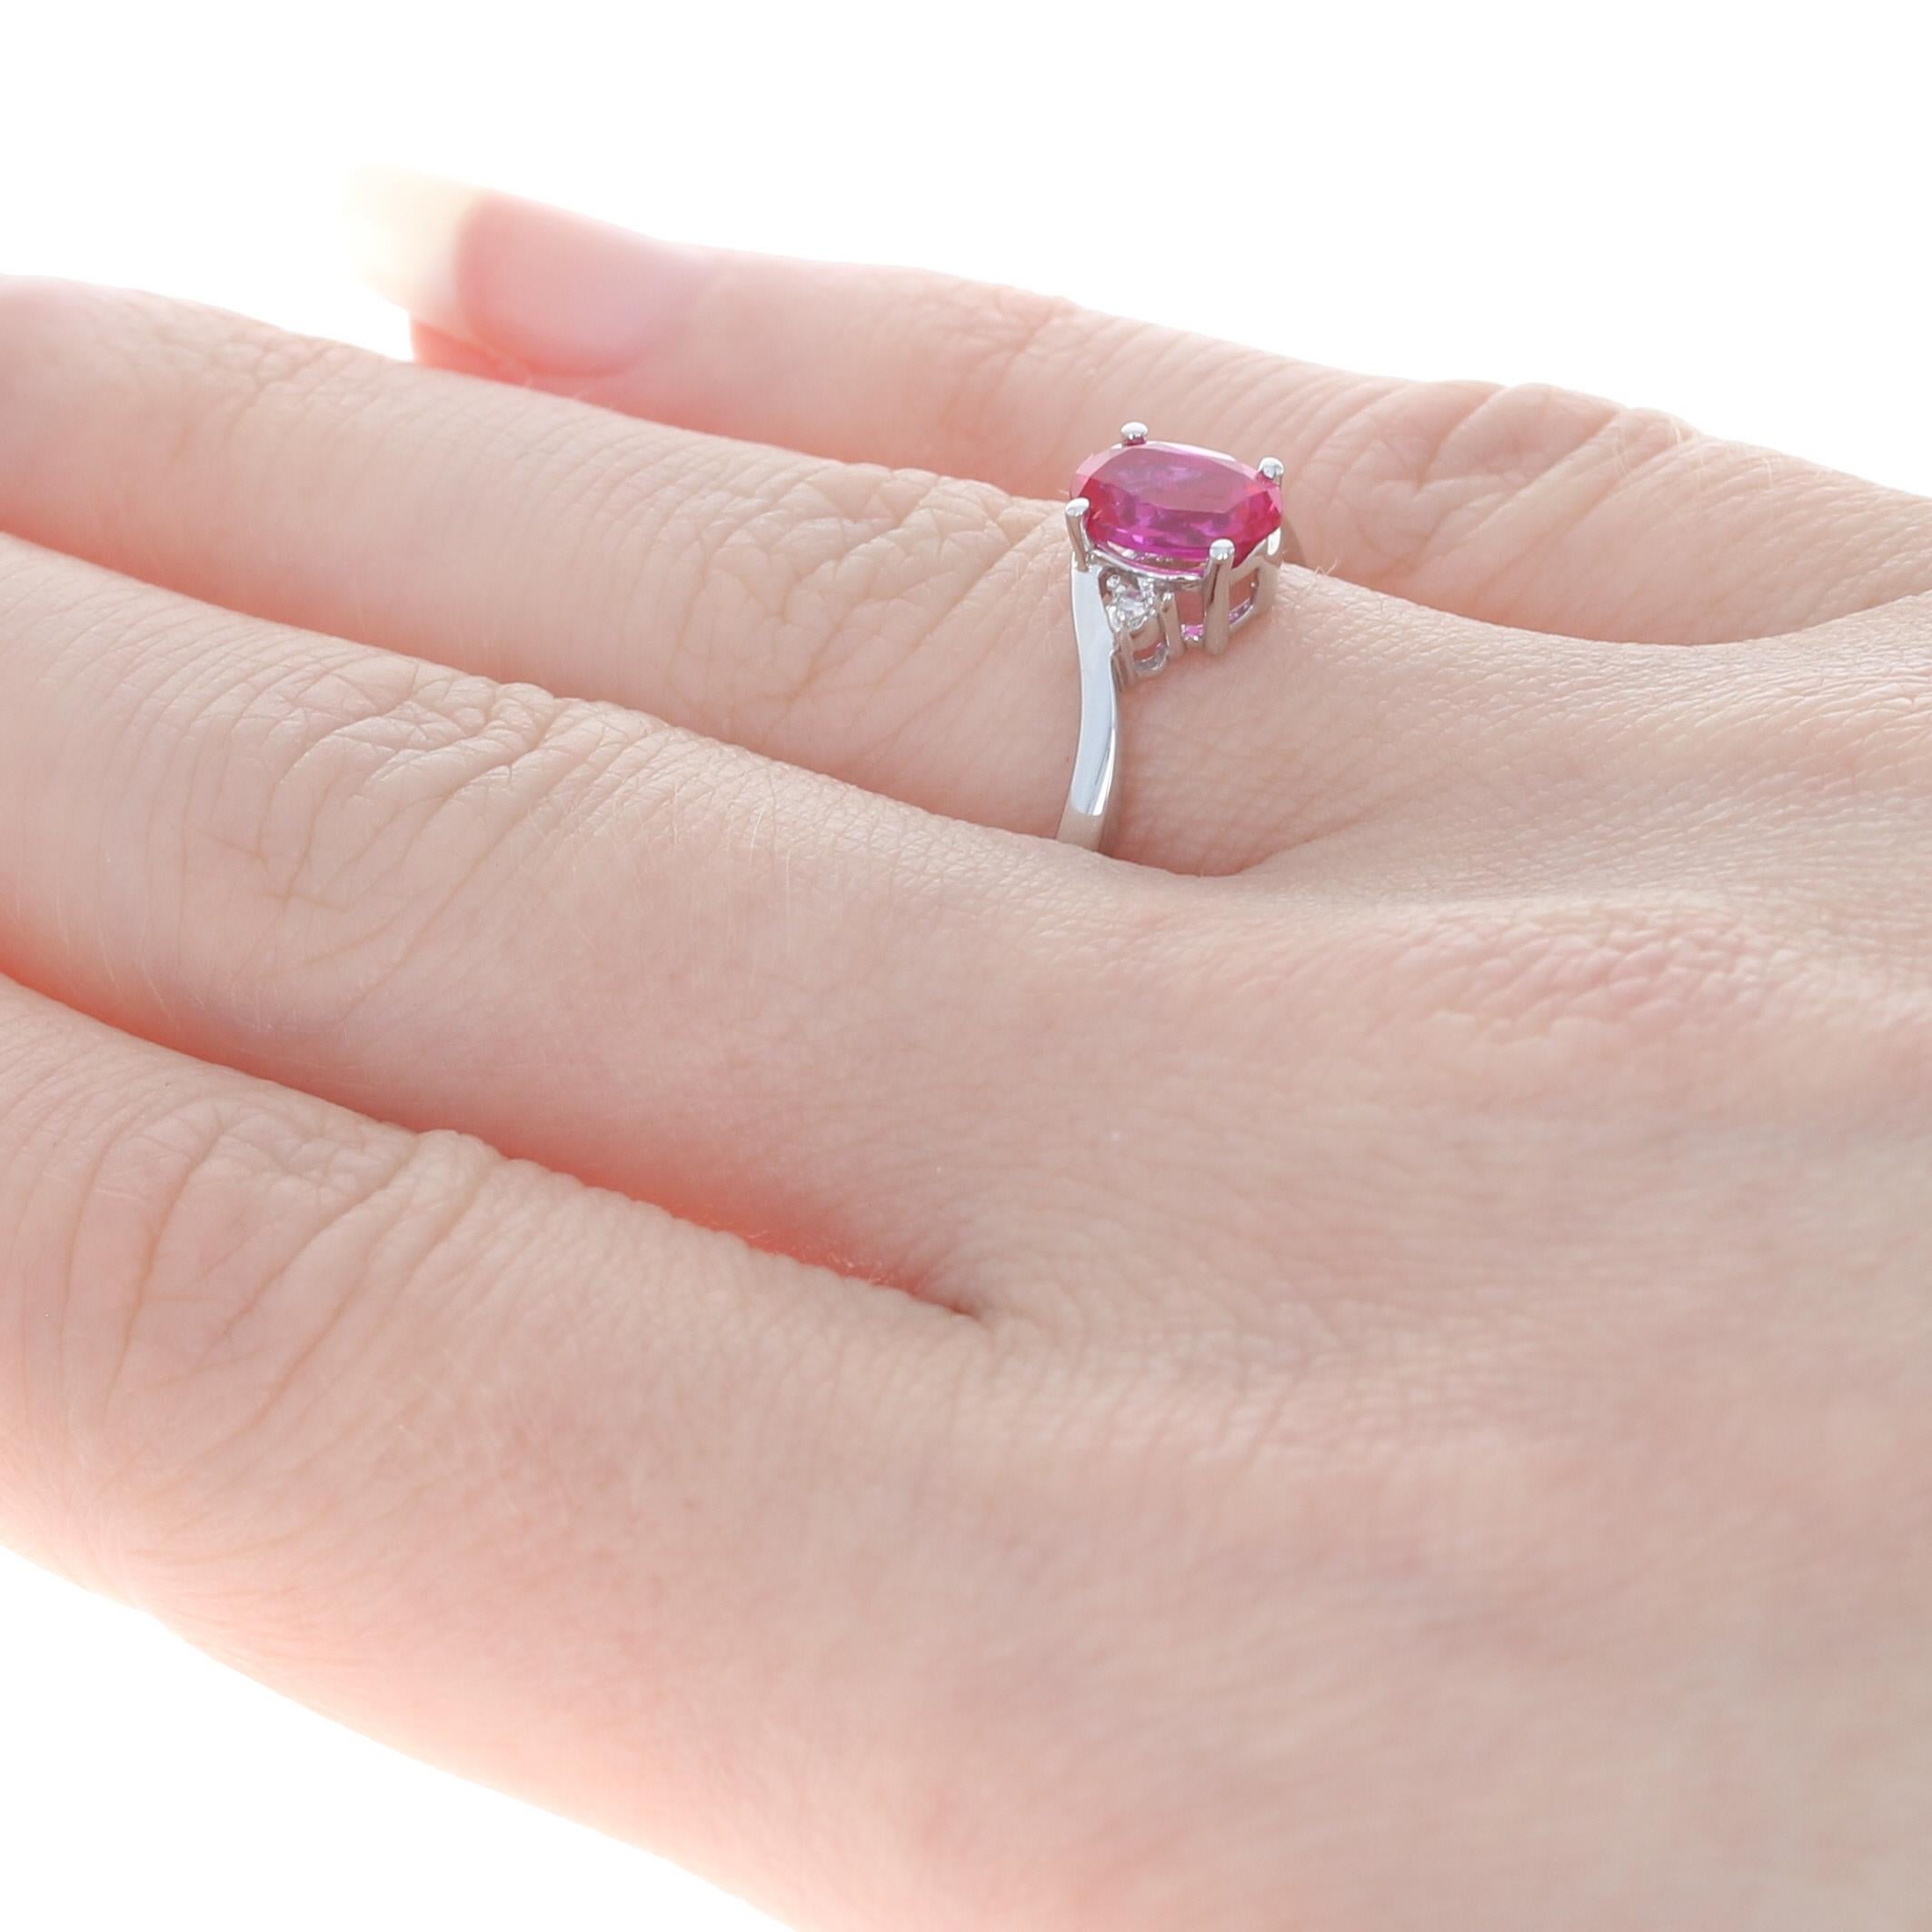 For Sale:  New Synthetic Ruby & Diamond Ring, 10k White Gold Bypass 1.07ctw 4